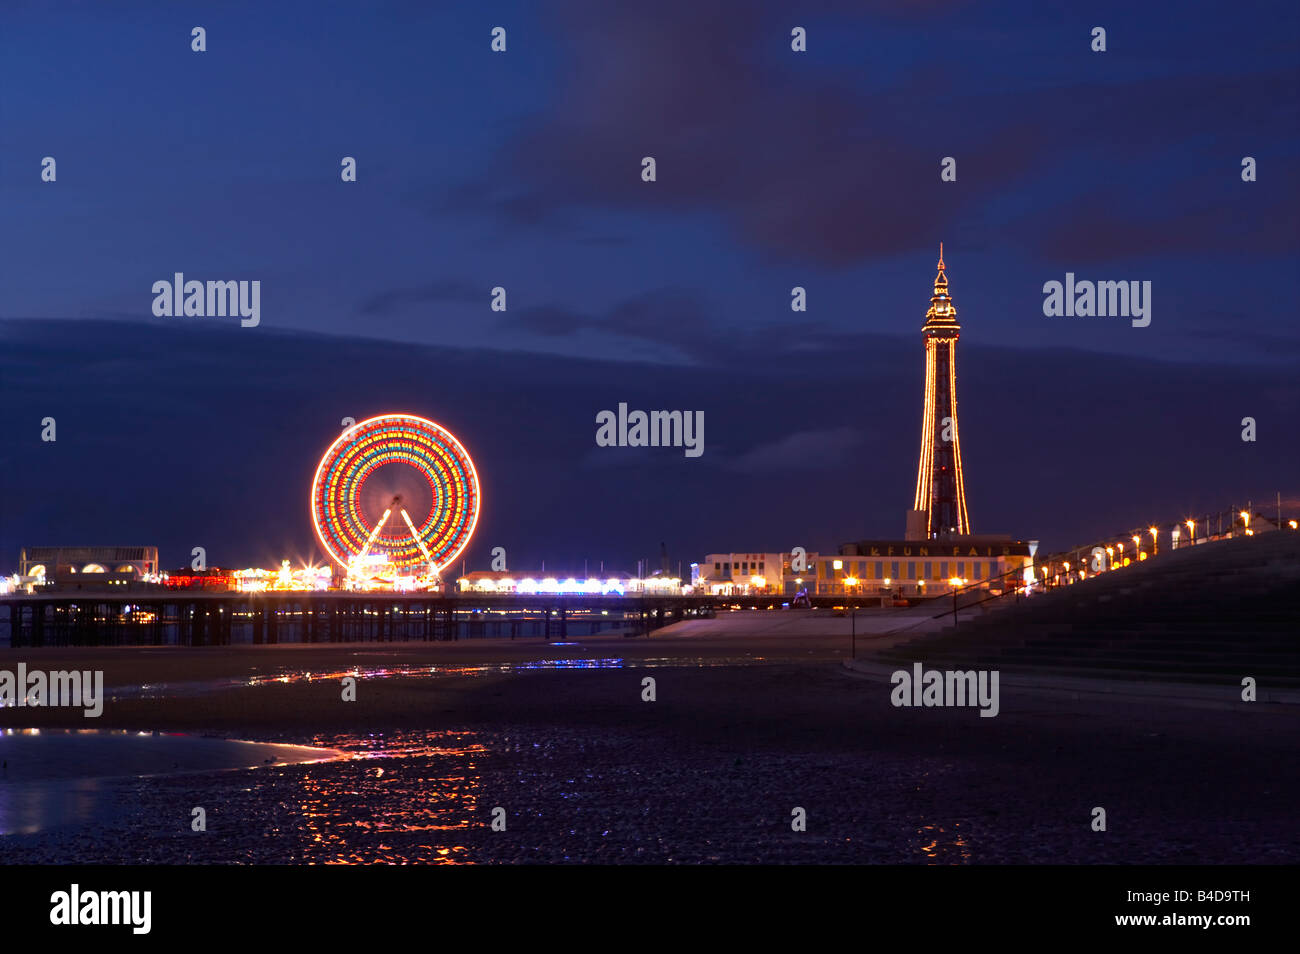 BLACKPOOL TOWER CENTRAL PIER FERRIS WHEEL AND ILLUMINATIONS AT DUSK Stock Photo